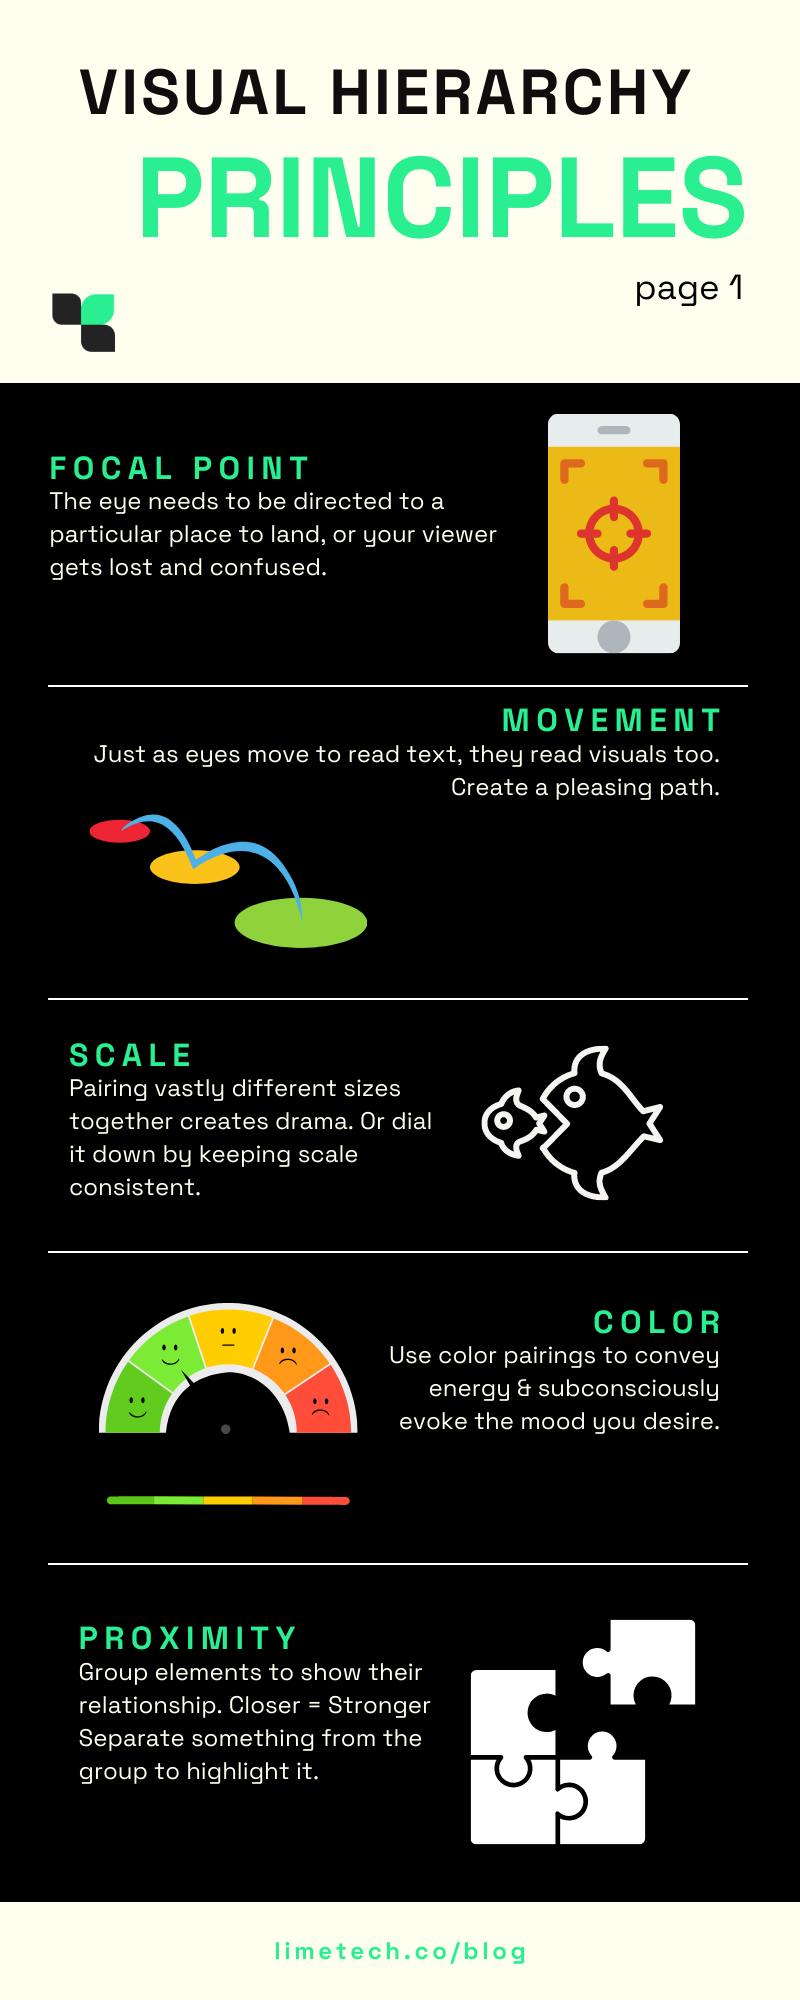 Visual Hierarchy Principles infographic by Addie Kugler-Lunt for LimeTech page 1 of 2